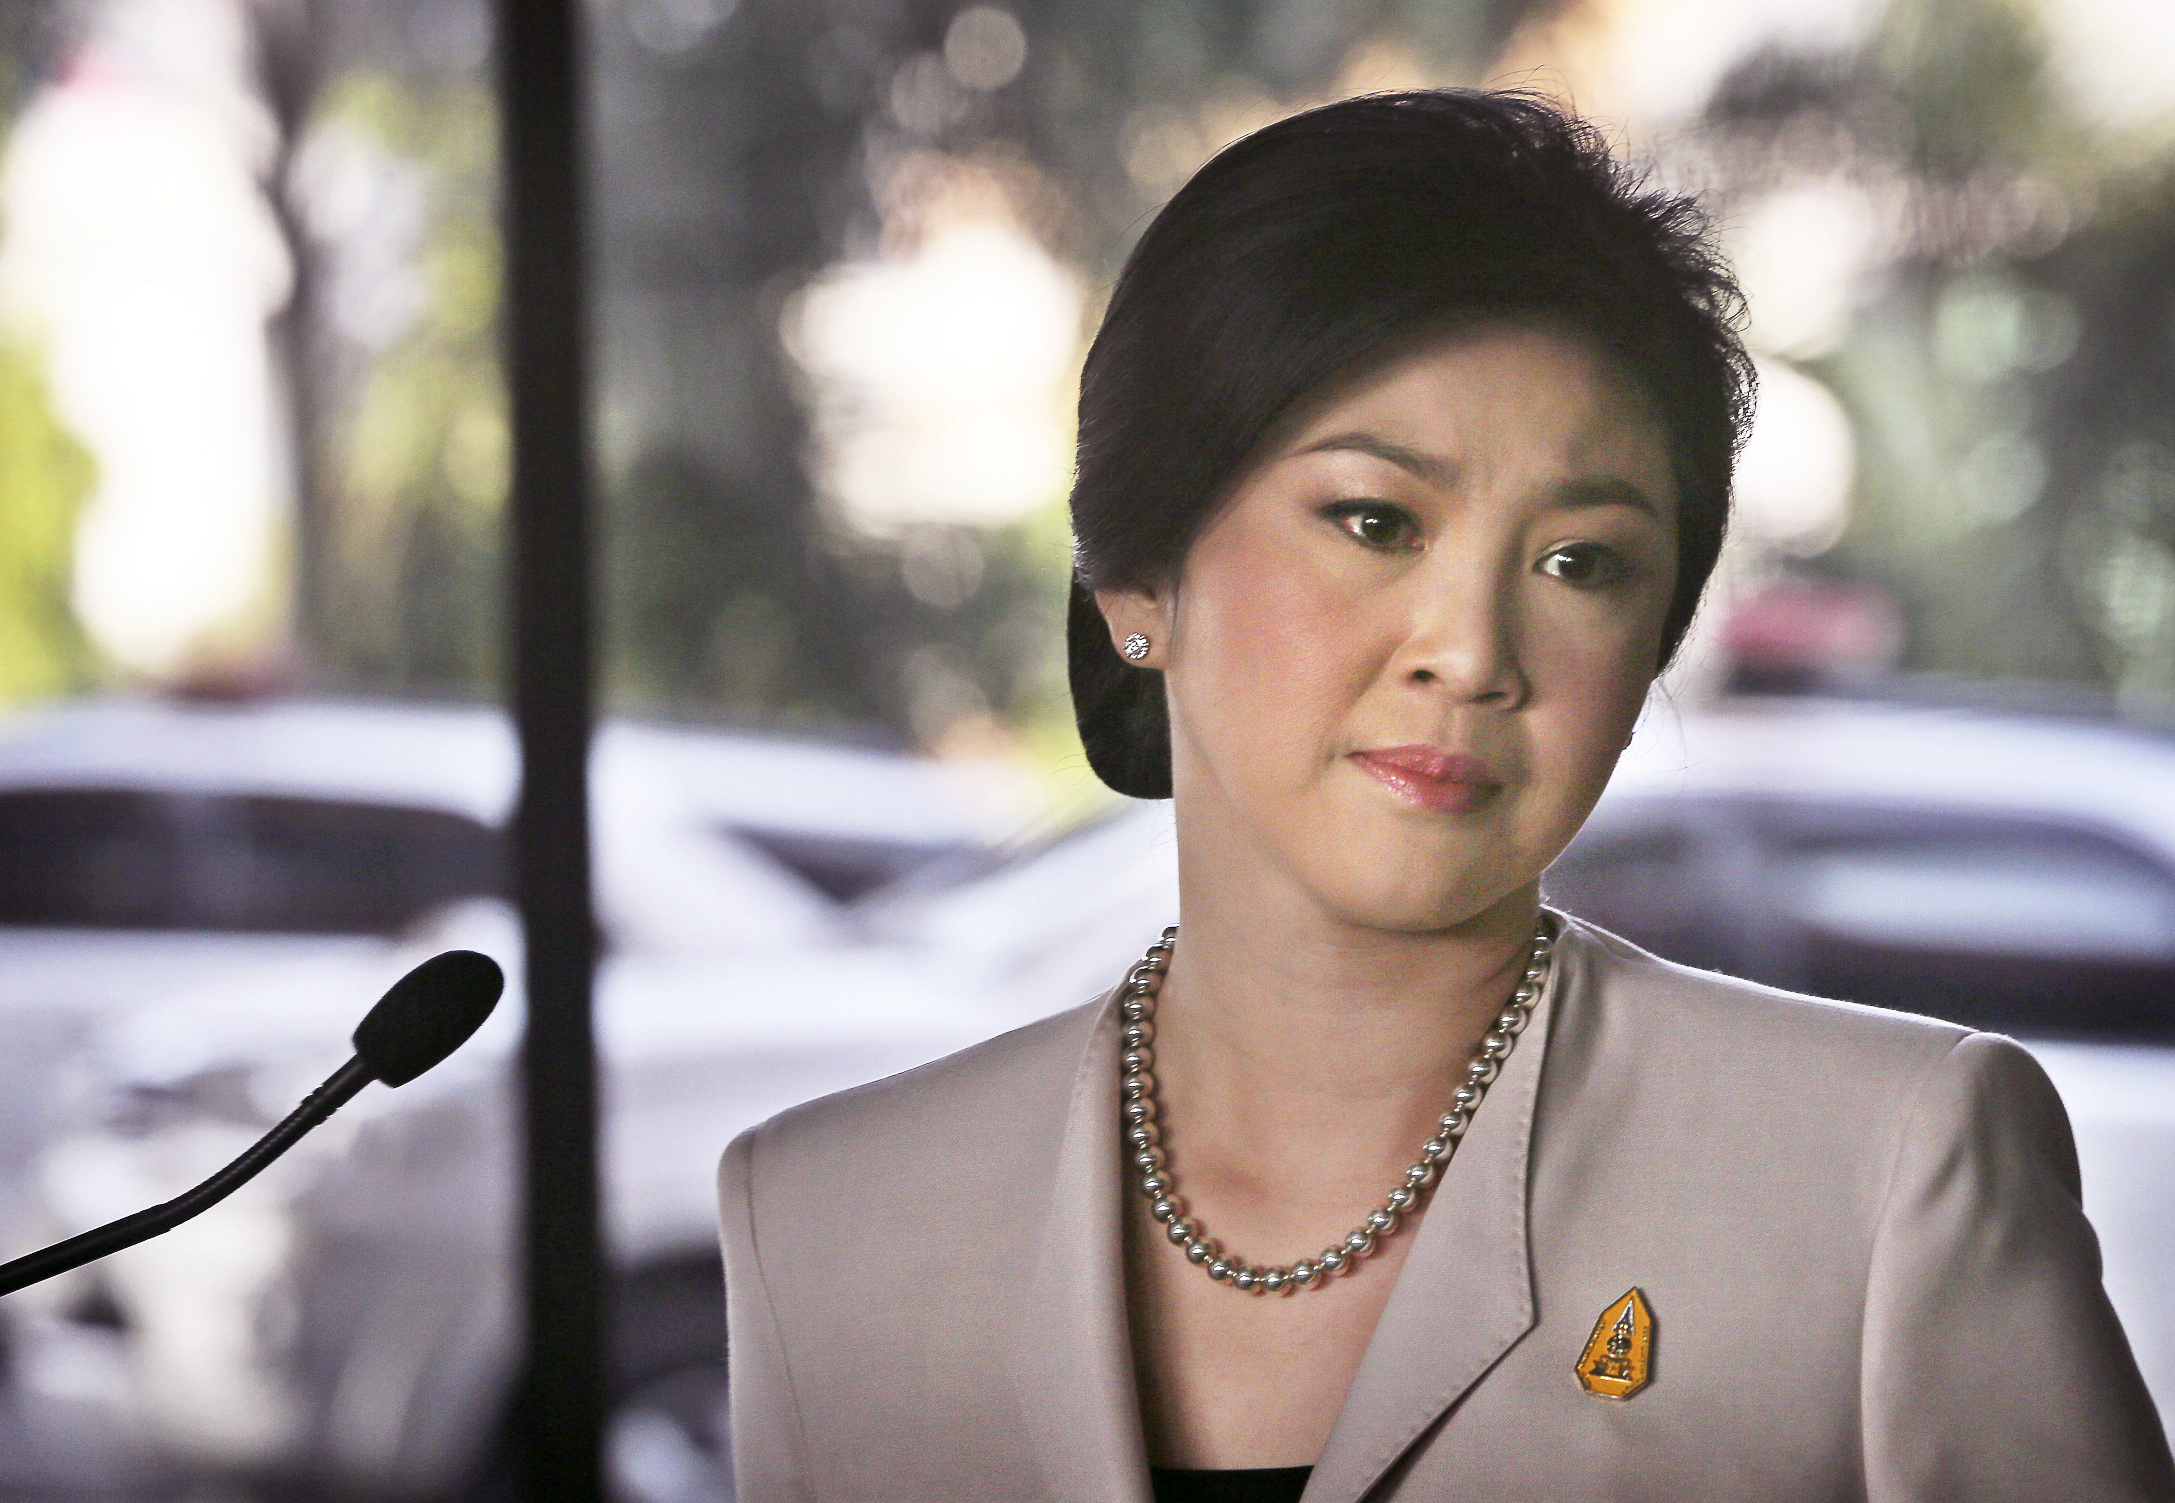 Thailand's Prime Minister Yingluck Shinawatra gets emotional after speaking at a press conference, in Bangkok. Photo: AP